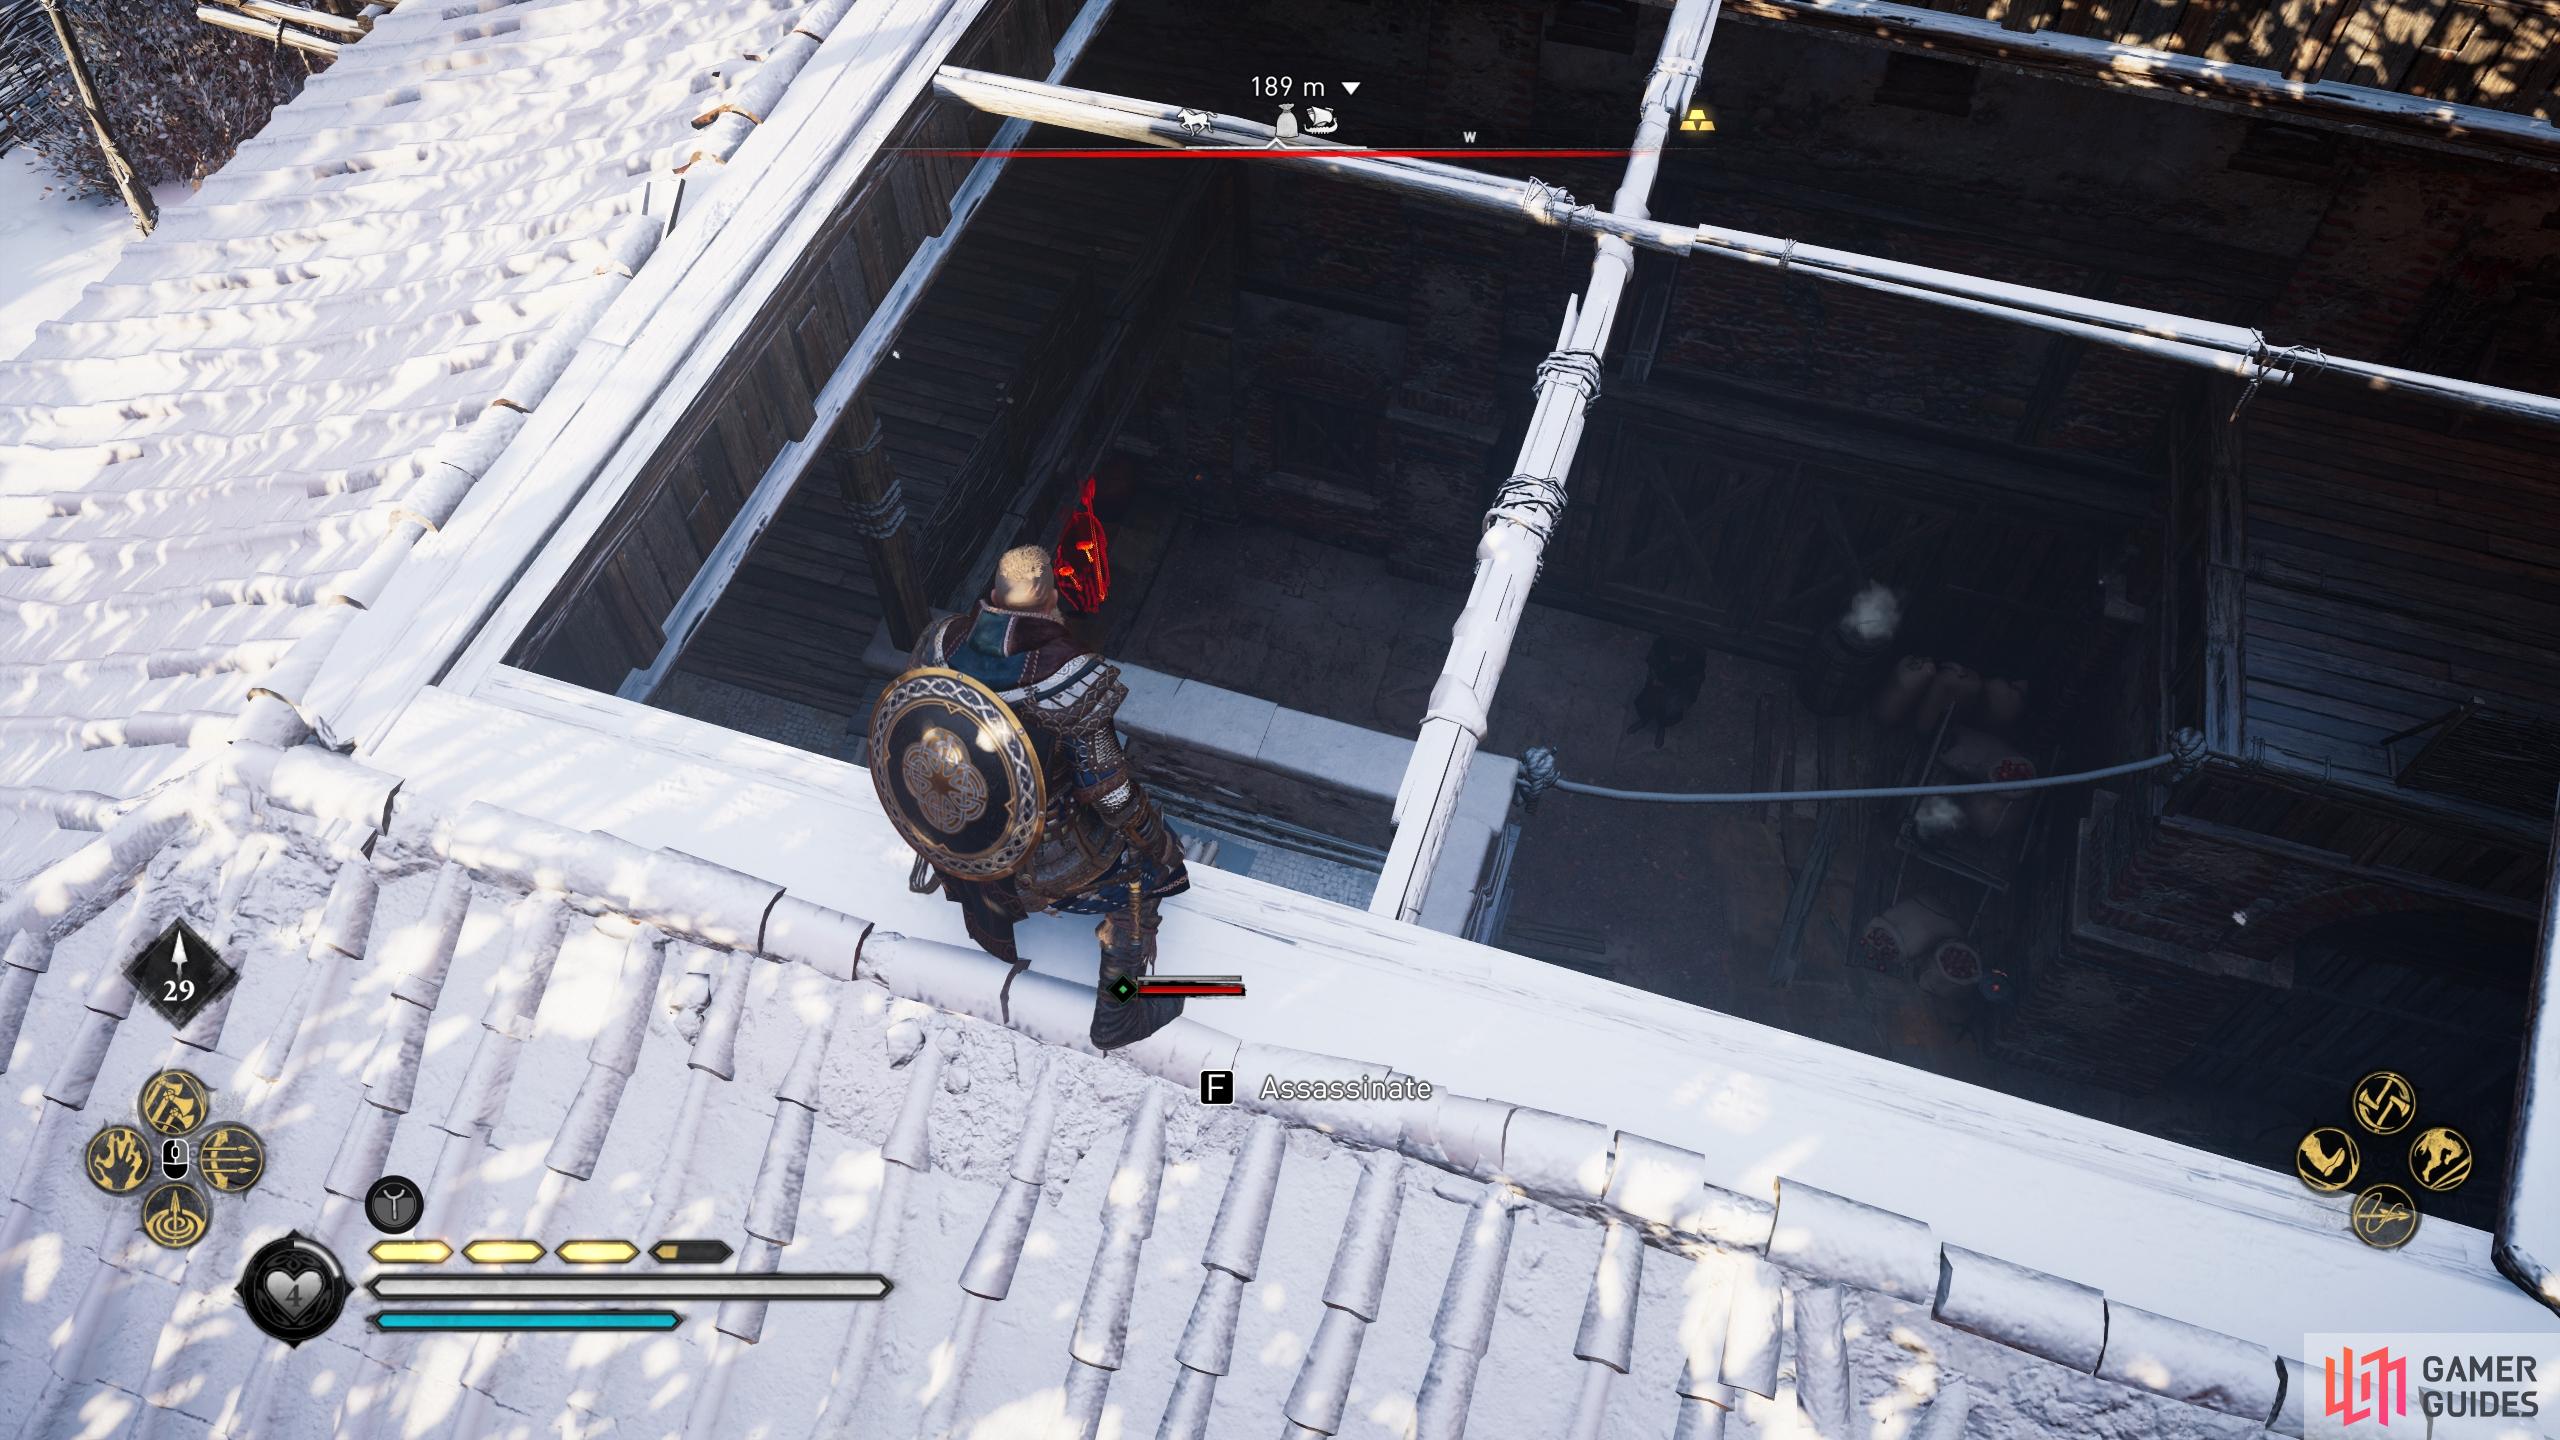 The easiest way into the depot is from the roof. You can assassinate the guards one by one as you move down.